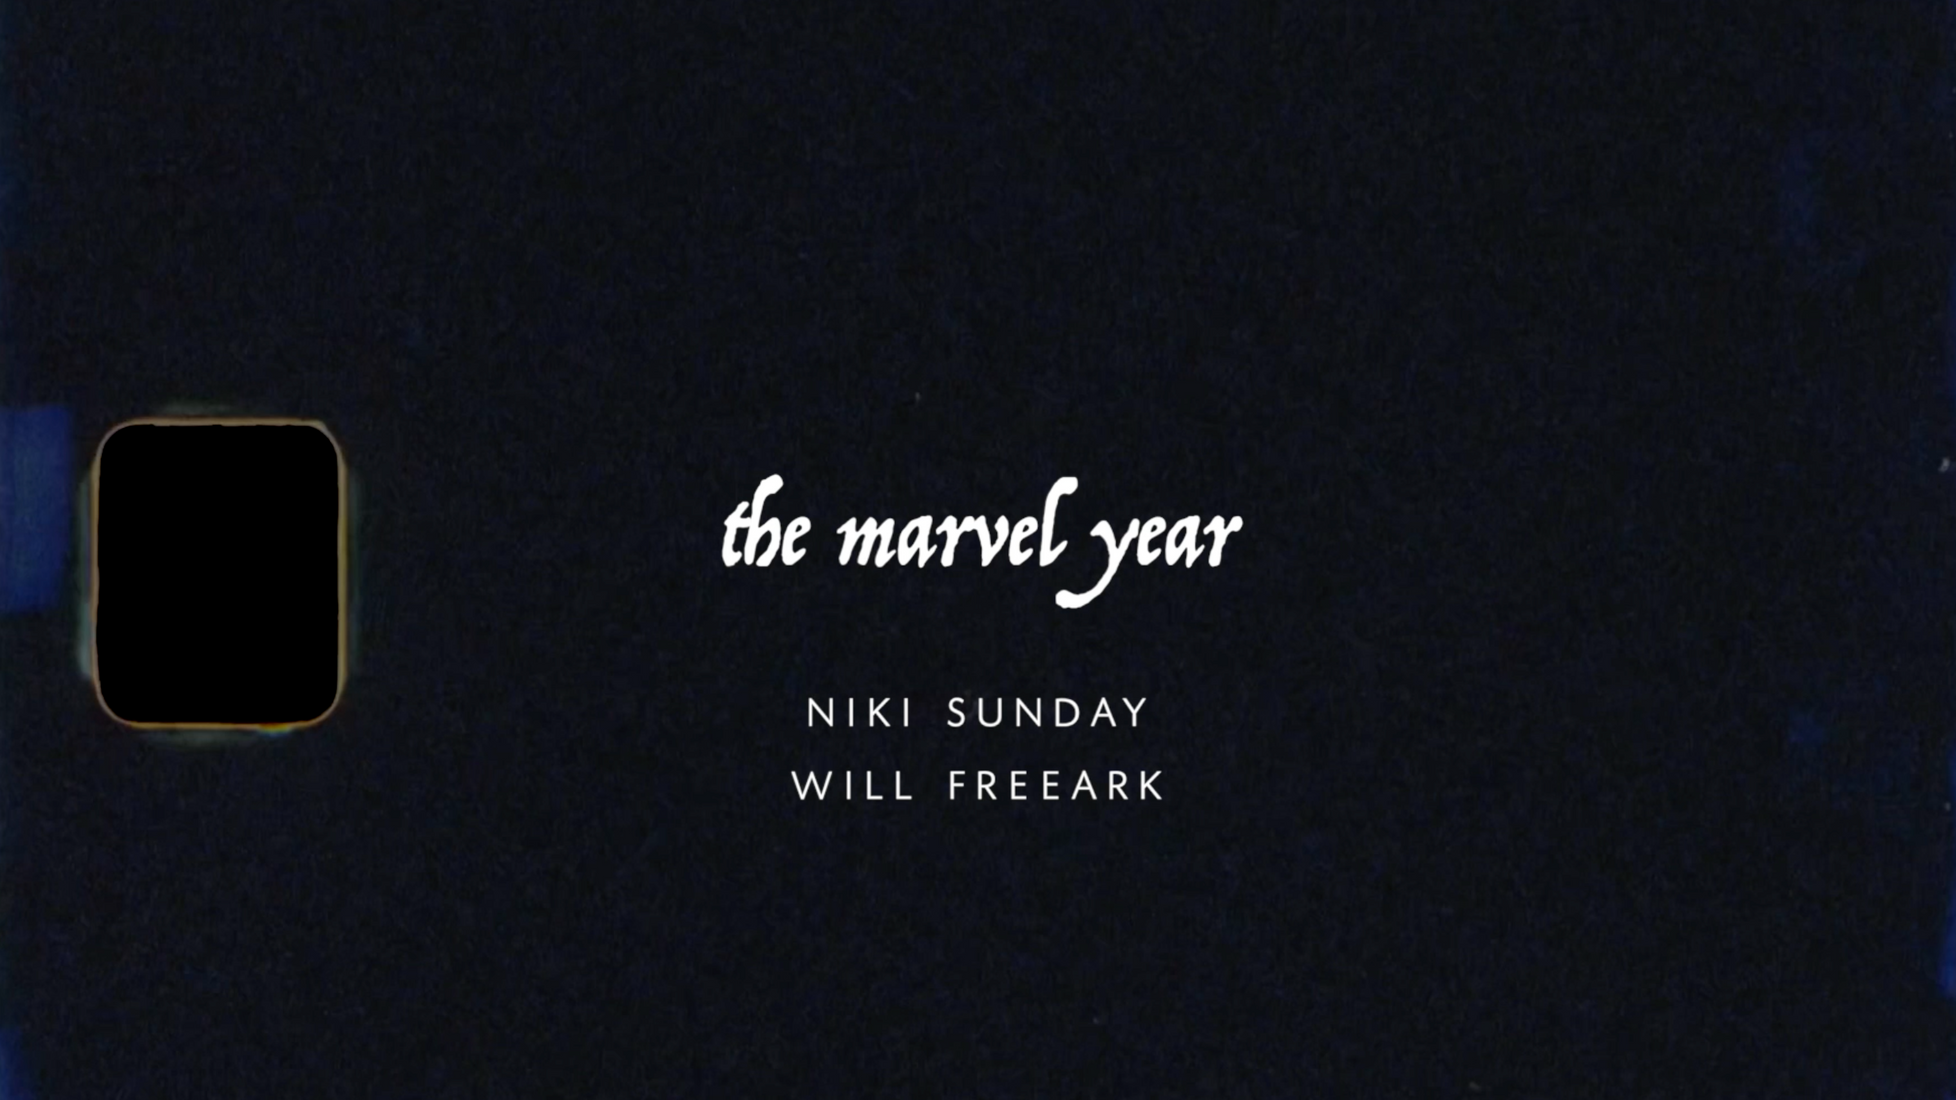 The Marvel Year